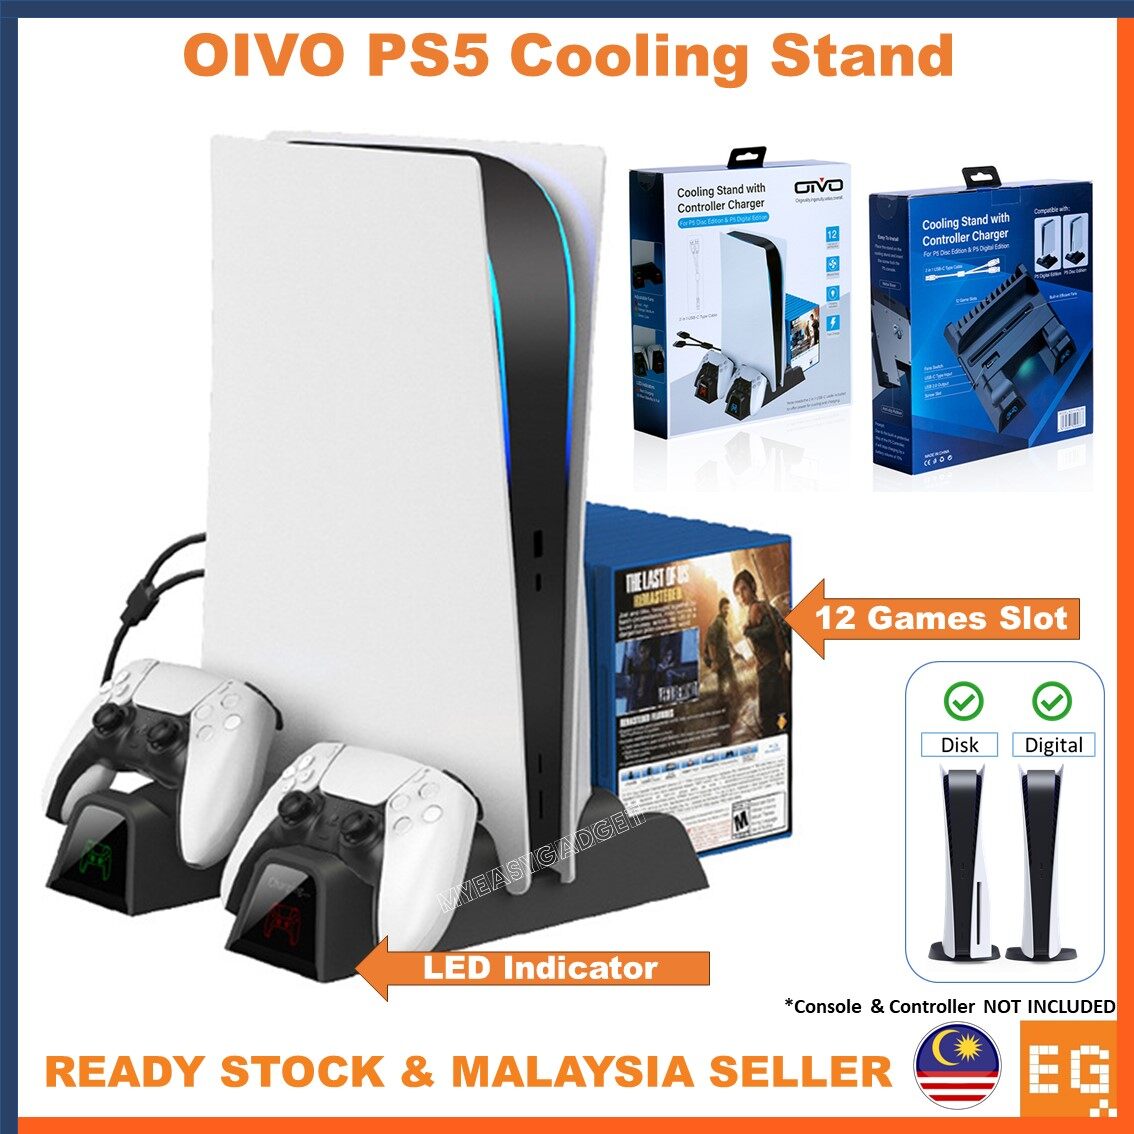 OIVO PS5 Cooling Stand With LED Indicator Dual PS5 Controller Charger For Disk & Digital Edition IV-P5235B